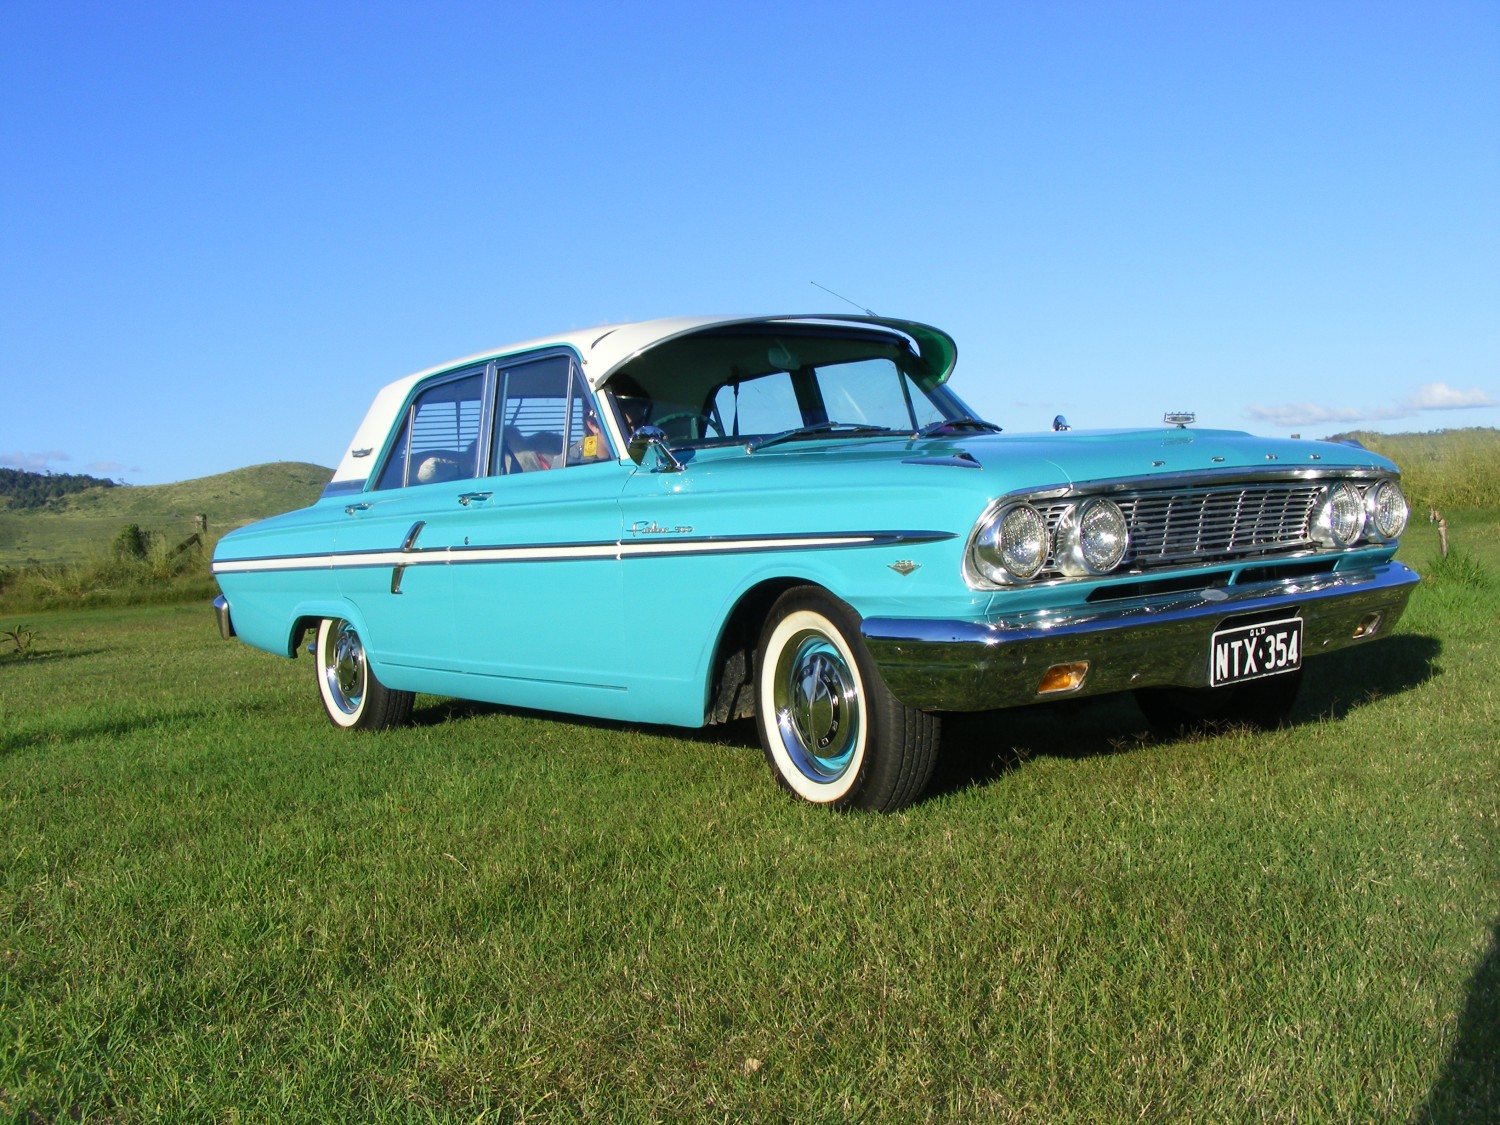 1964 Ford Fairlane 500 Compact